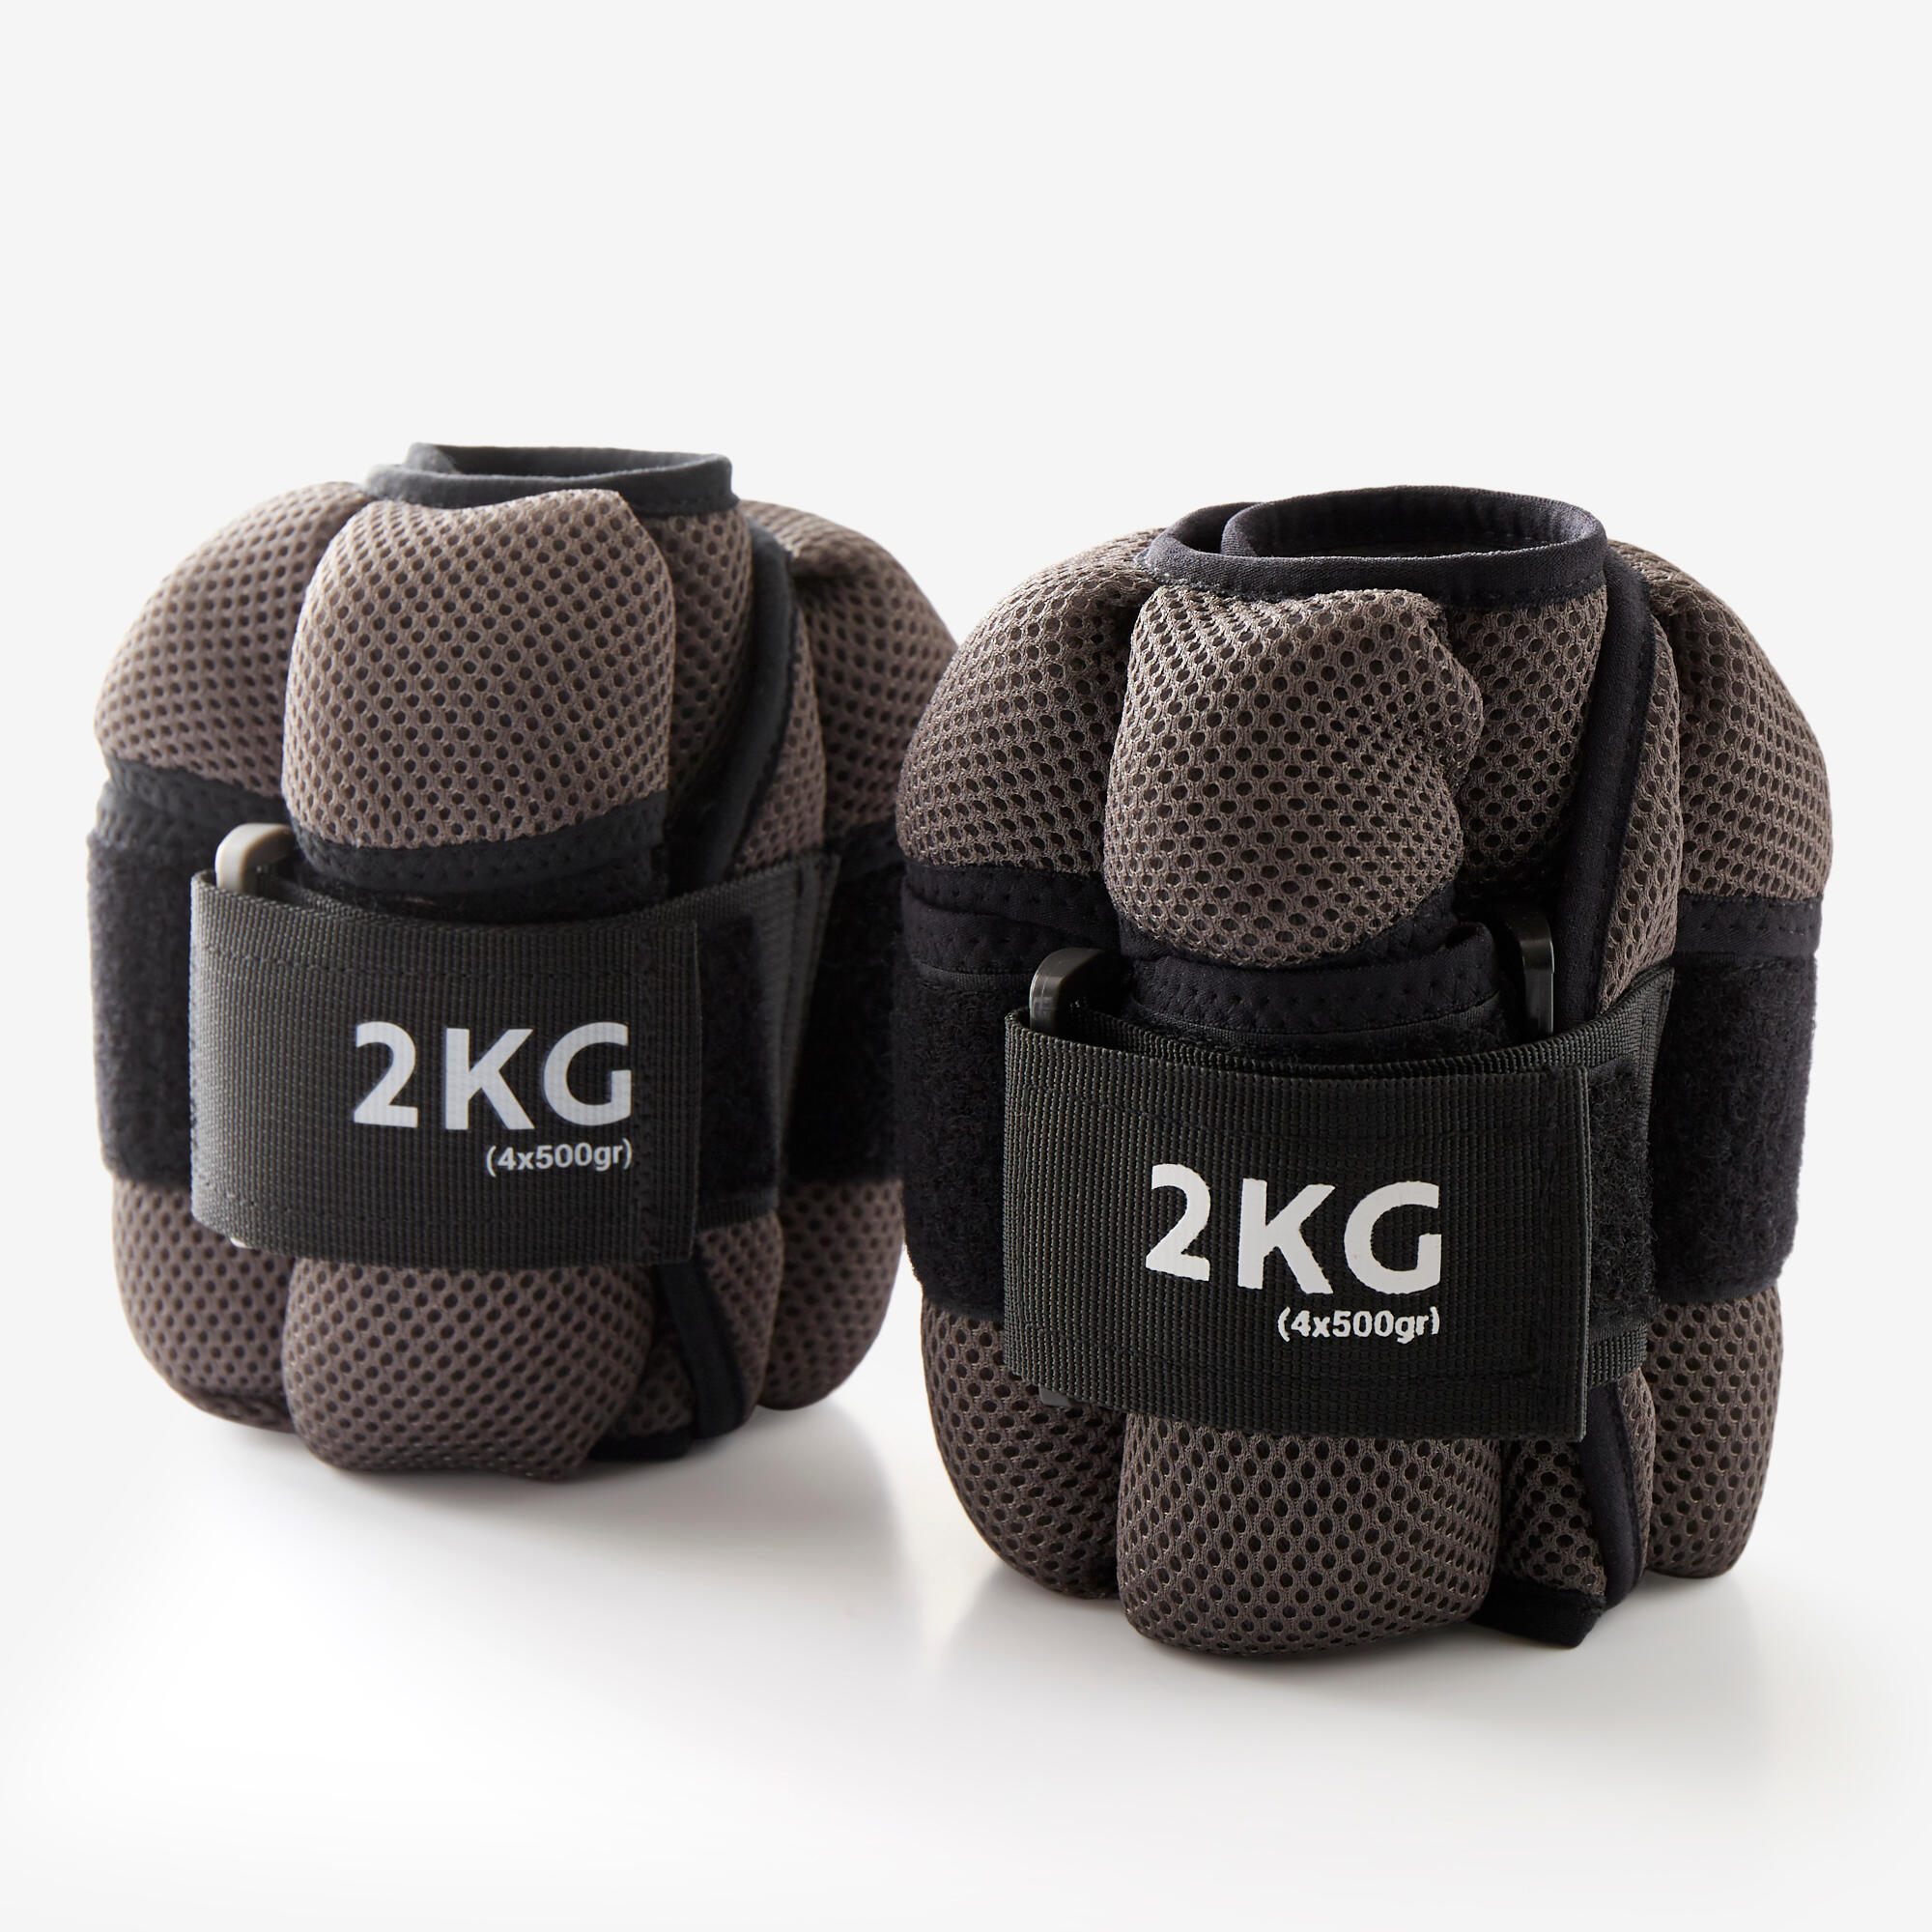 2 kg Adjustable Wrist / Ankle Weights Twin-Pack - Grey 1/6